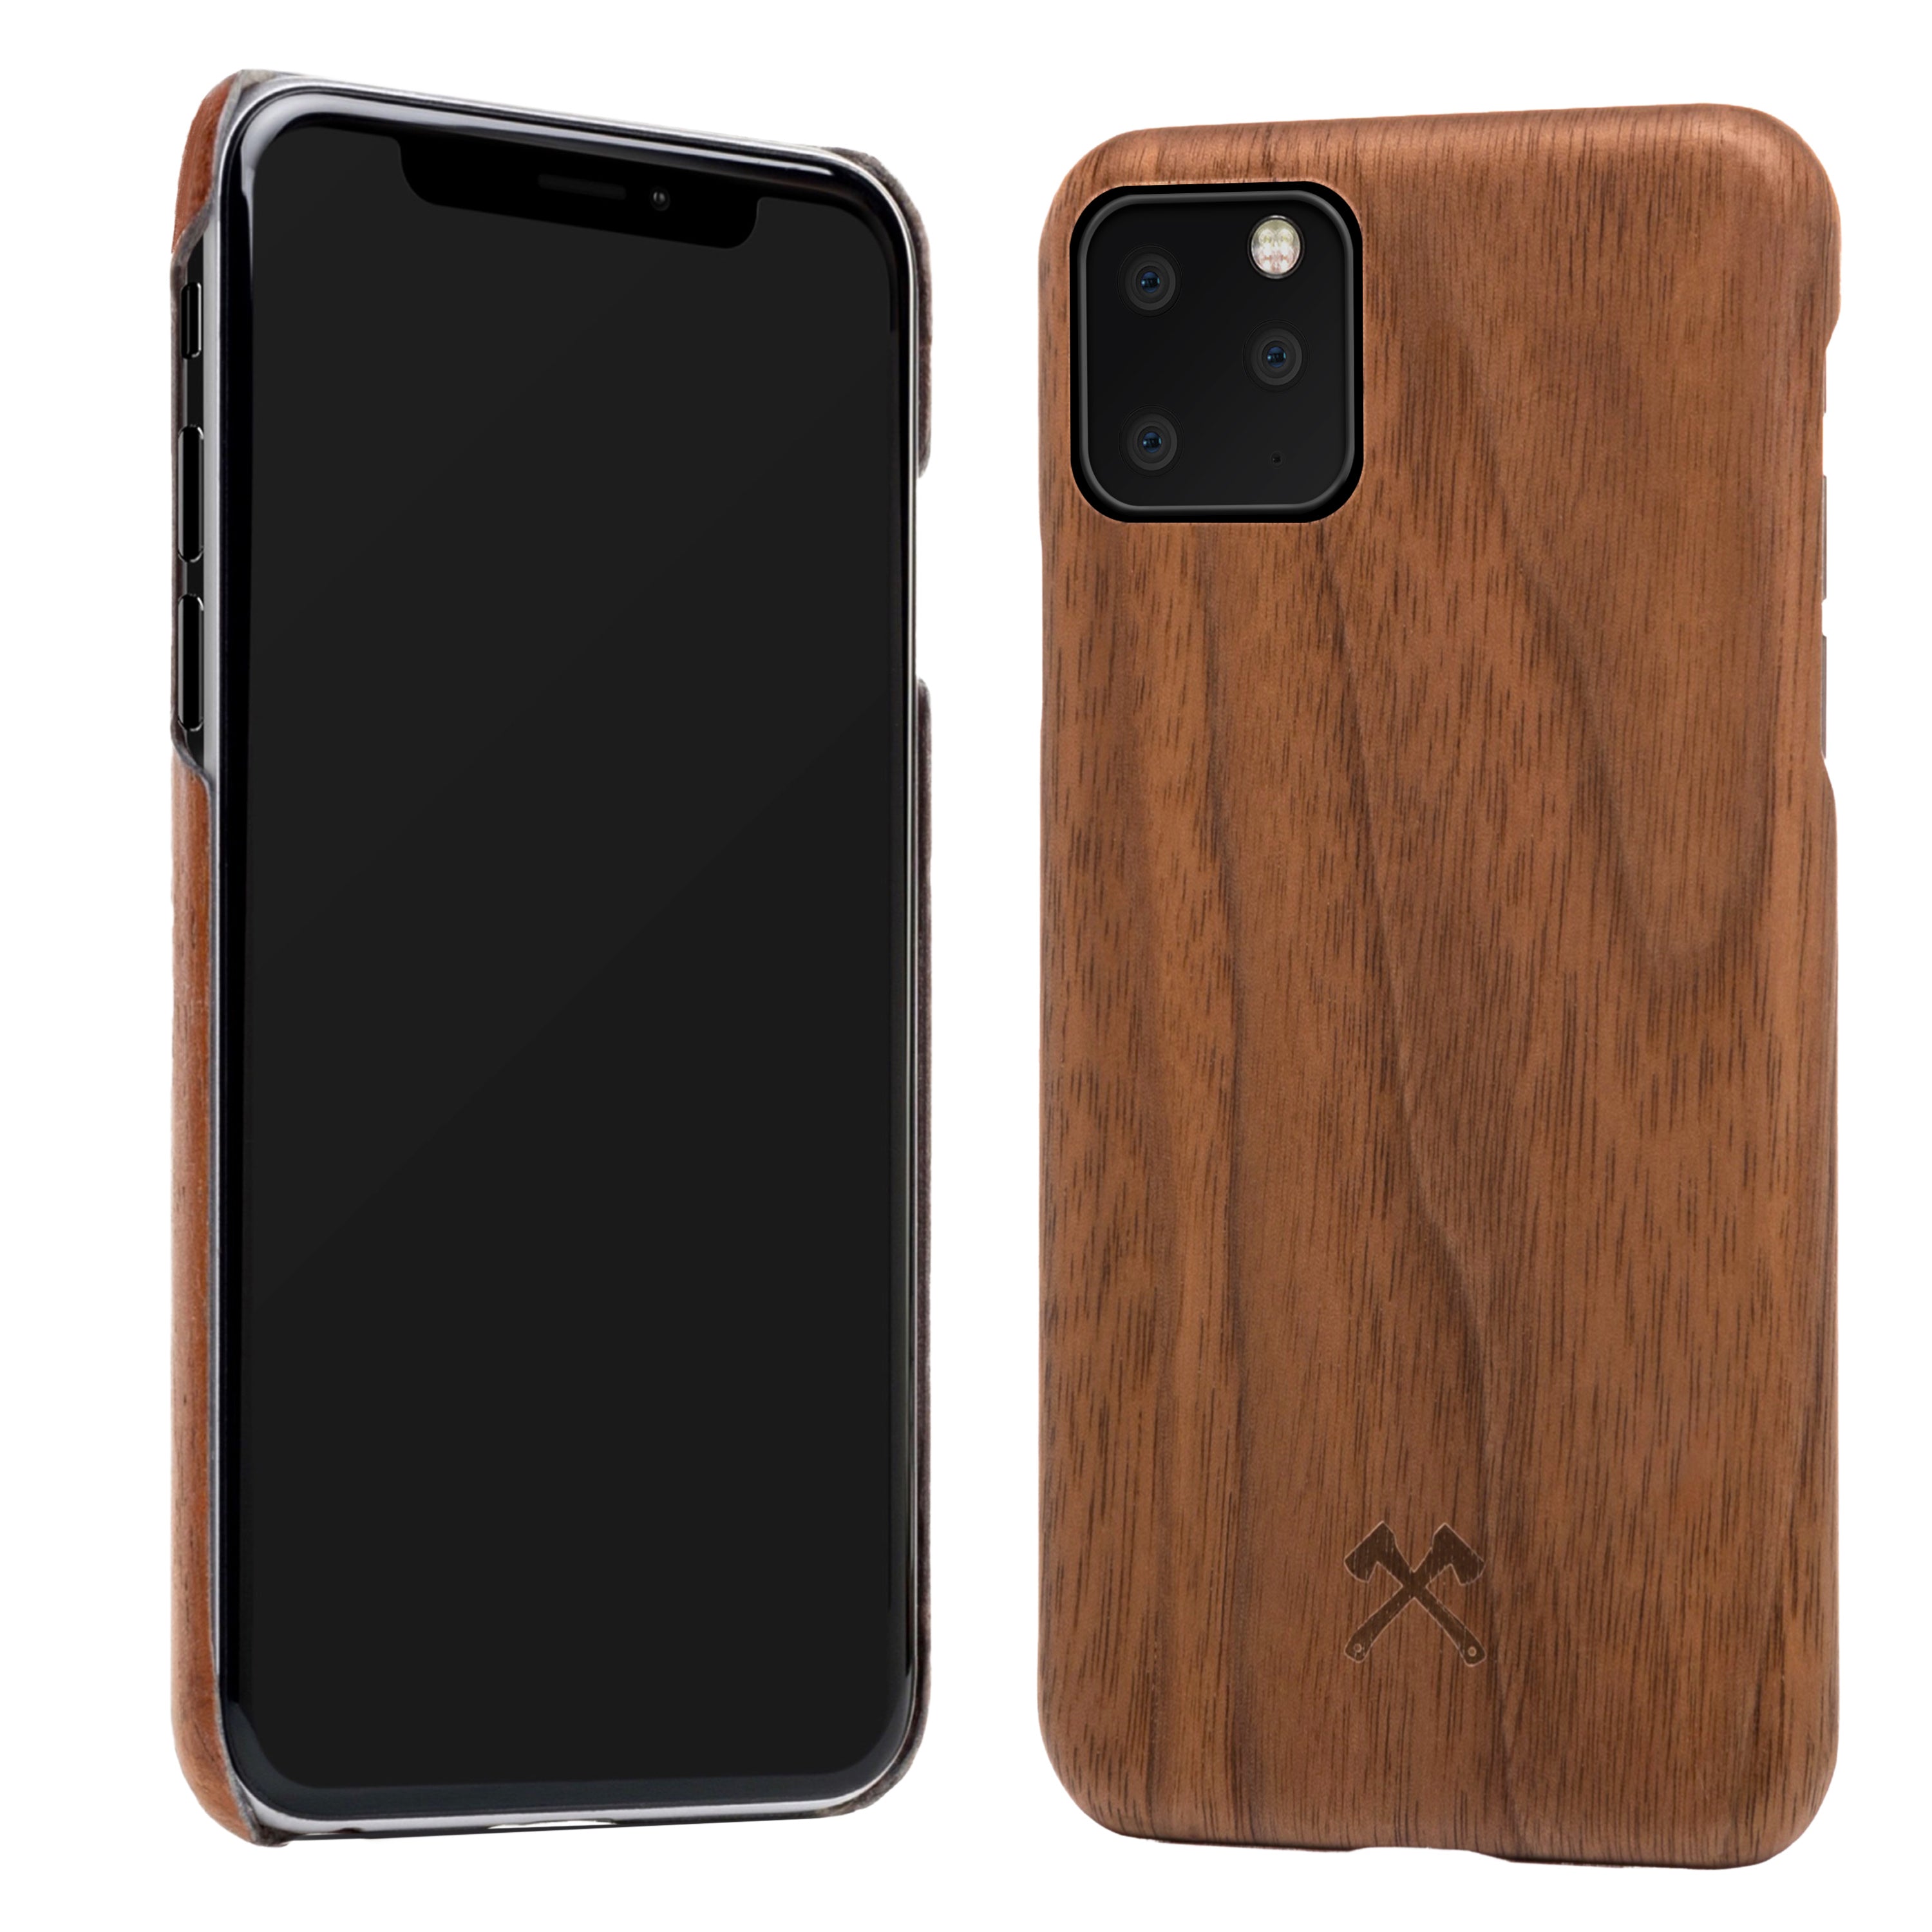 Woodcessories Eco Slim for New iPhone 11 Cases - Ante Shop